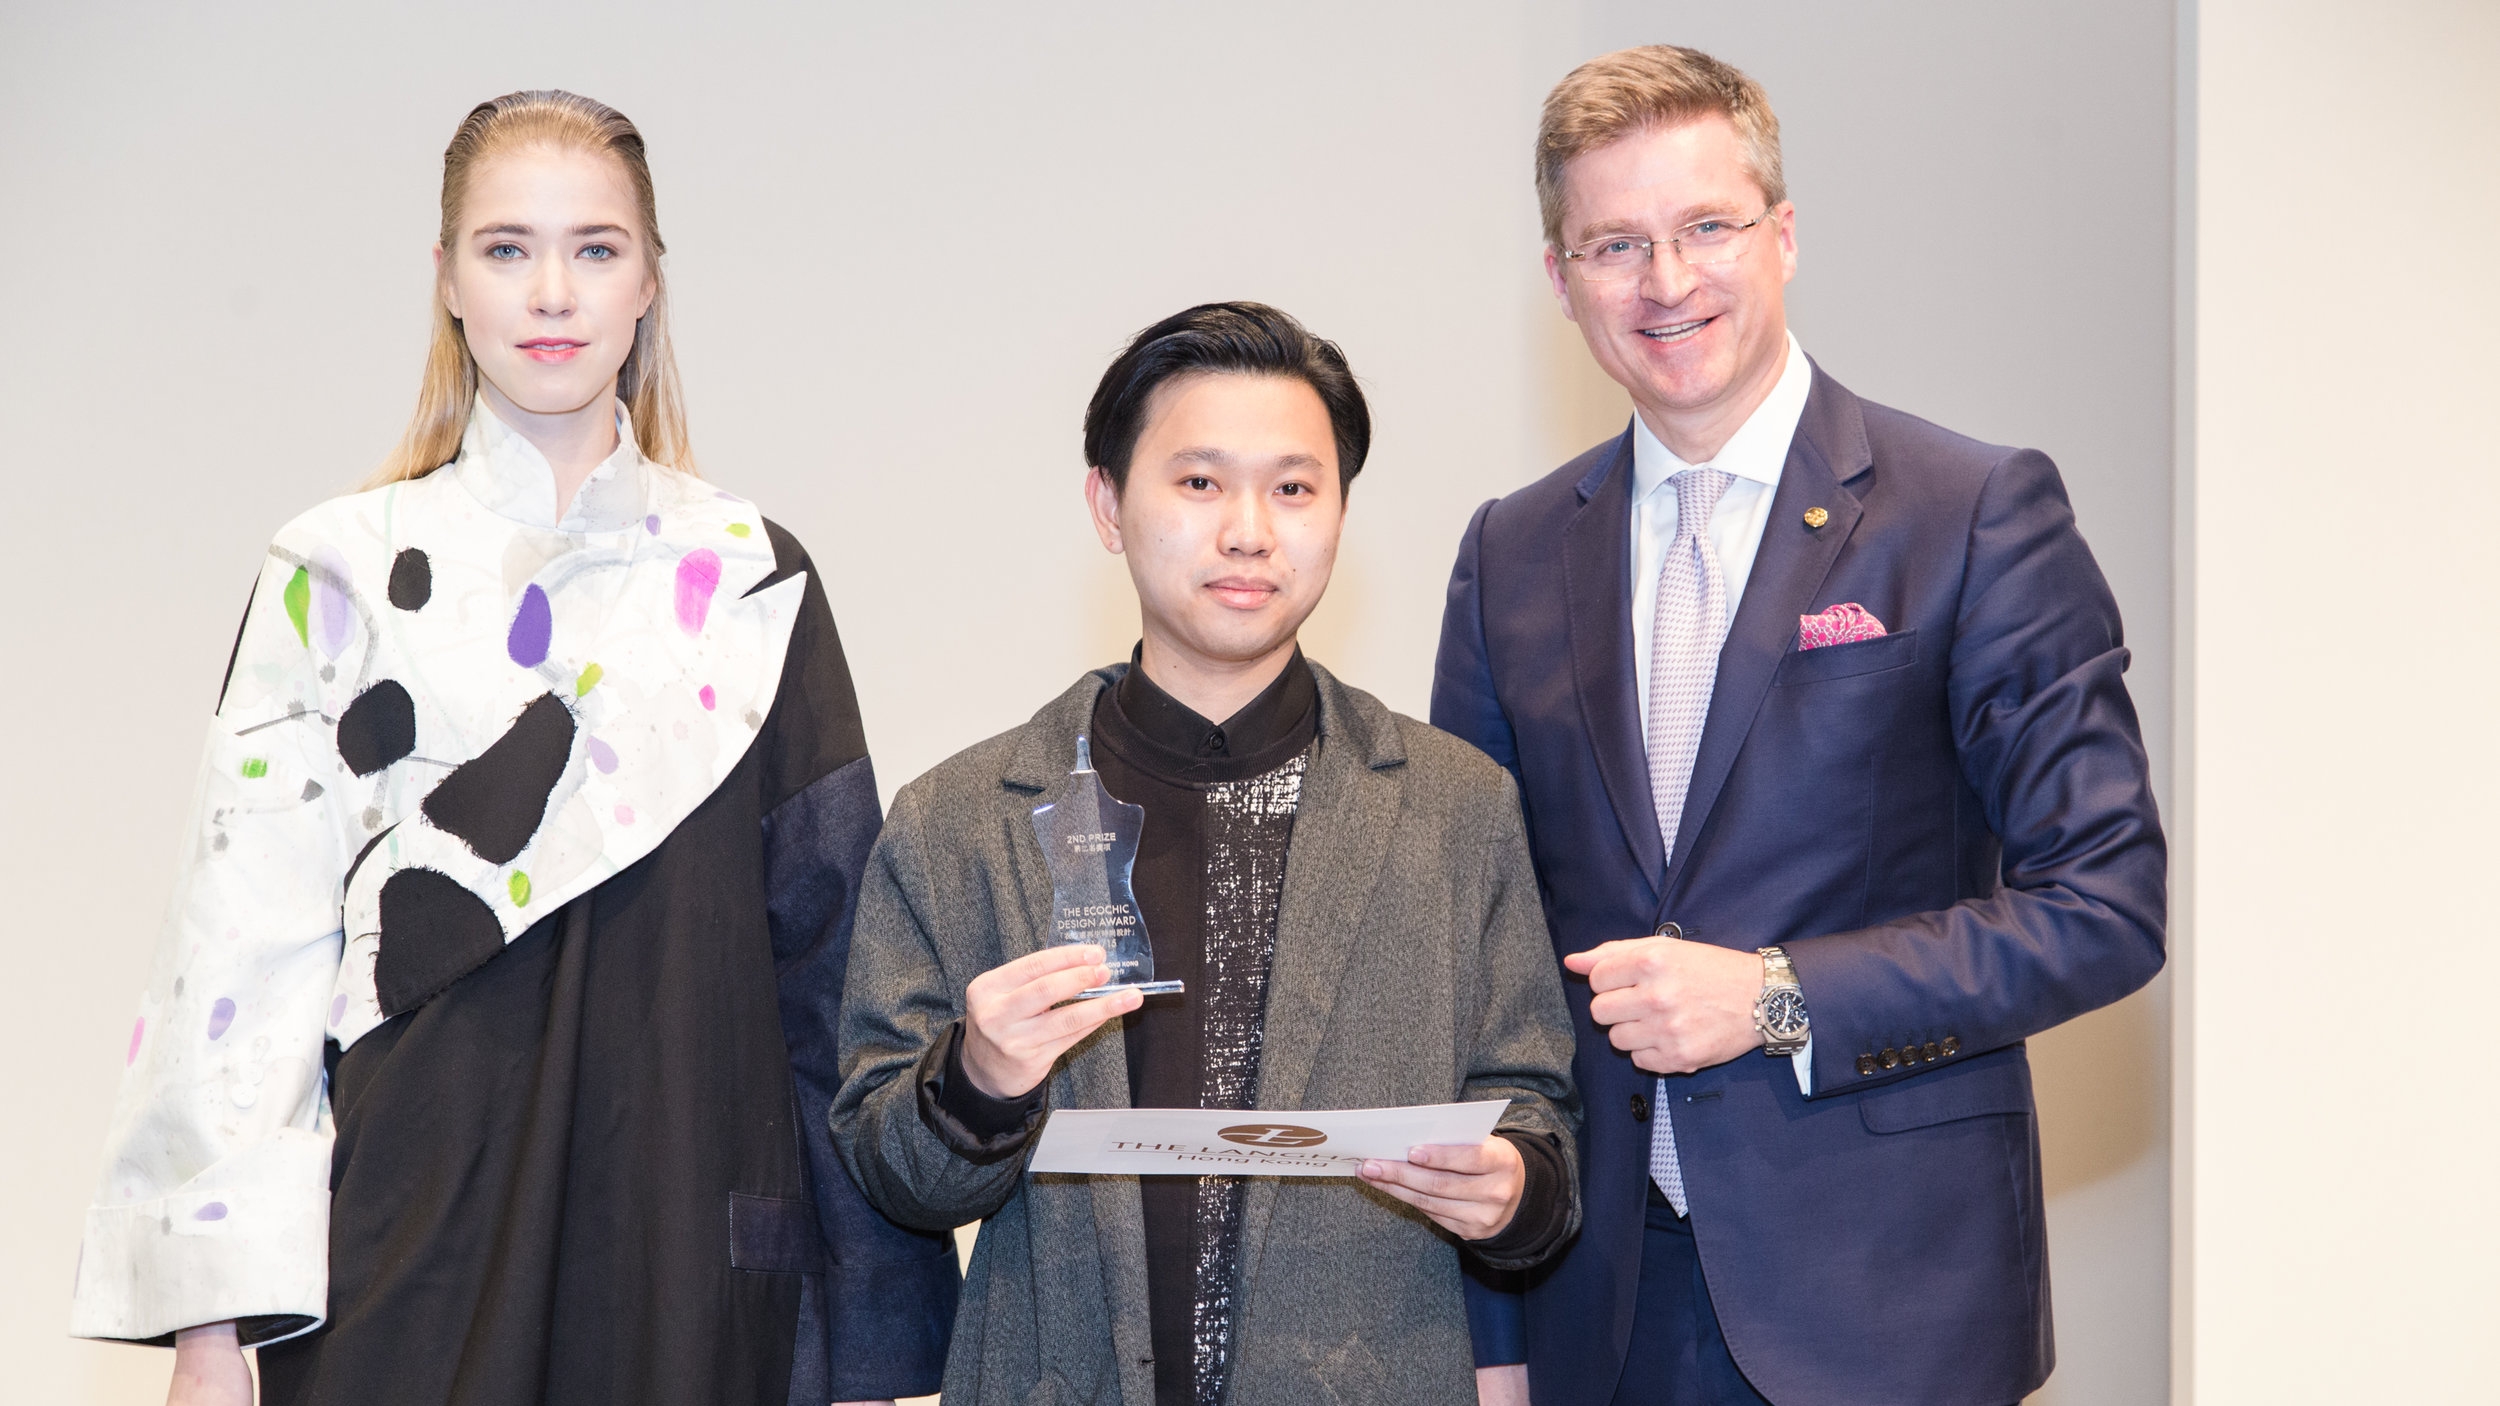 Victor Chu won the Second Prize: The EcoChic Design Award 2014/15 with The Langham, Hong Kong